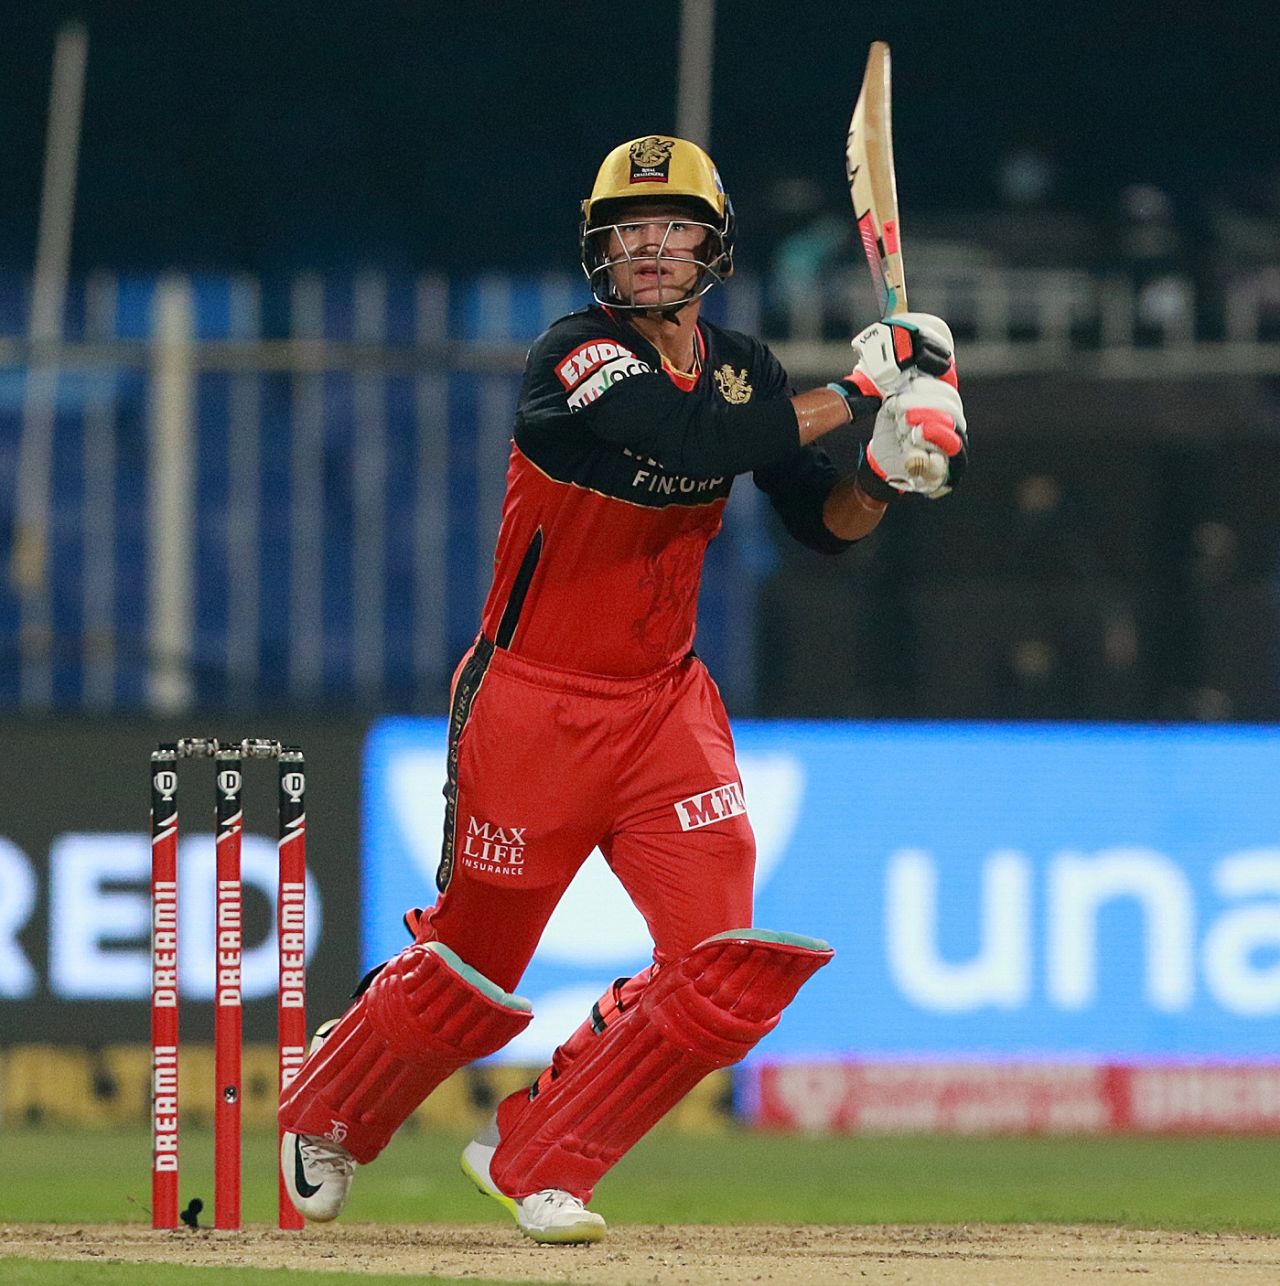 Josh Philippe goes over the off side, Royal Challengers Bangalore vs Sunrisers Hyderabad, IPL 2020, Sharjah, October 31, 2020